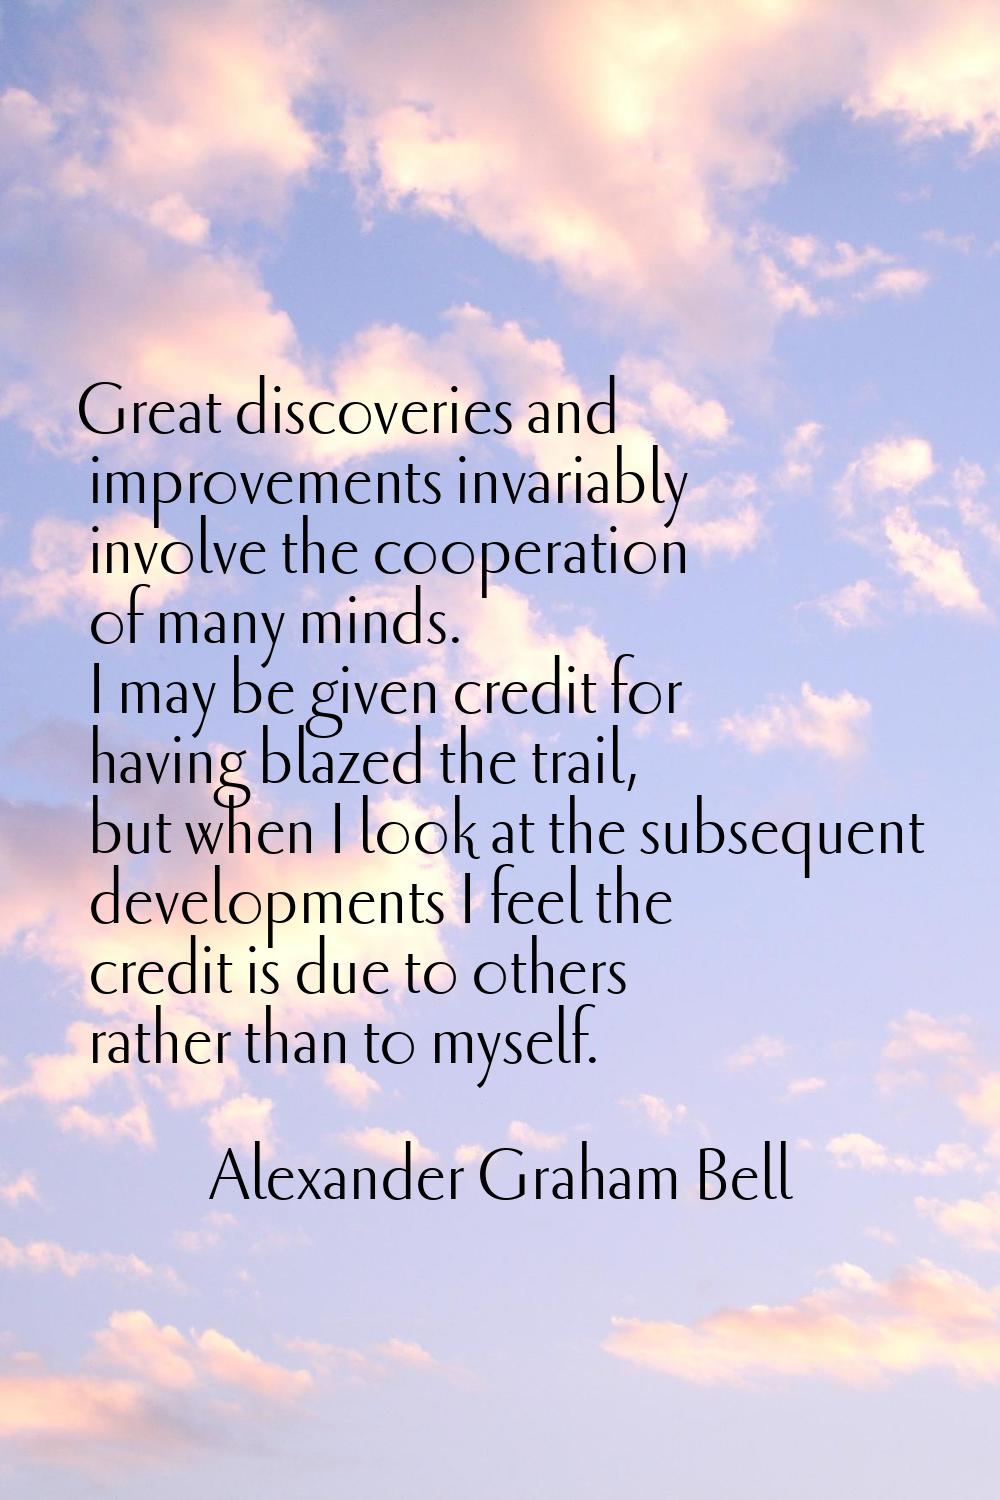 Great discoveries and improvements invariably involve the cooperation of many minds. I may be given